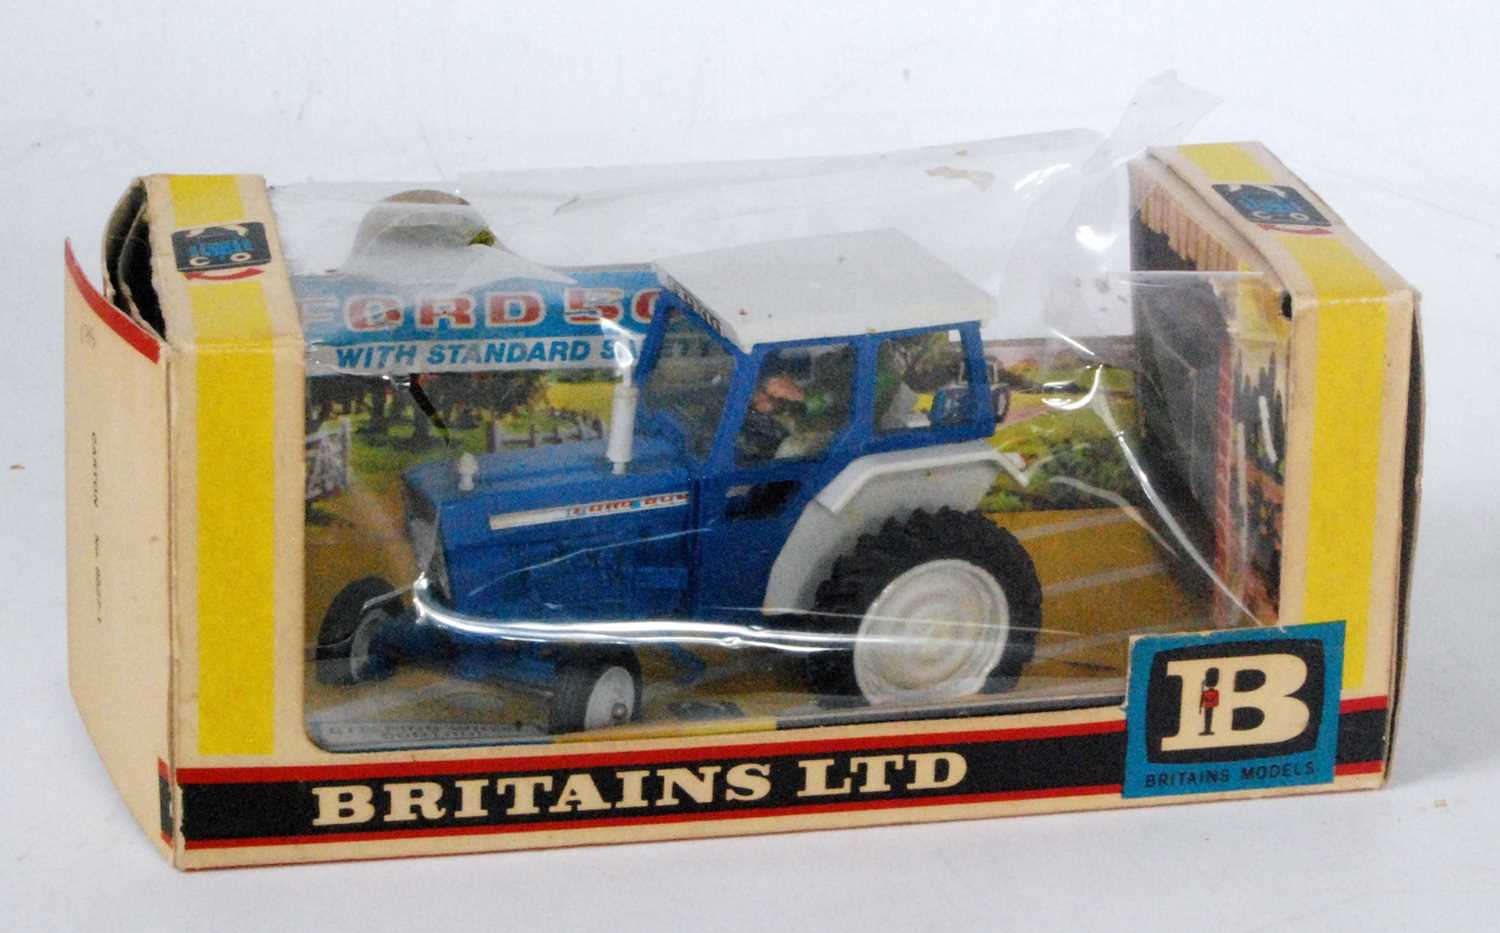 A Britains No. 9527 Ford 5000 tractor with safety cab, housed in the original window box, box in